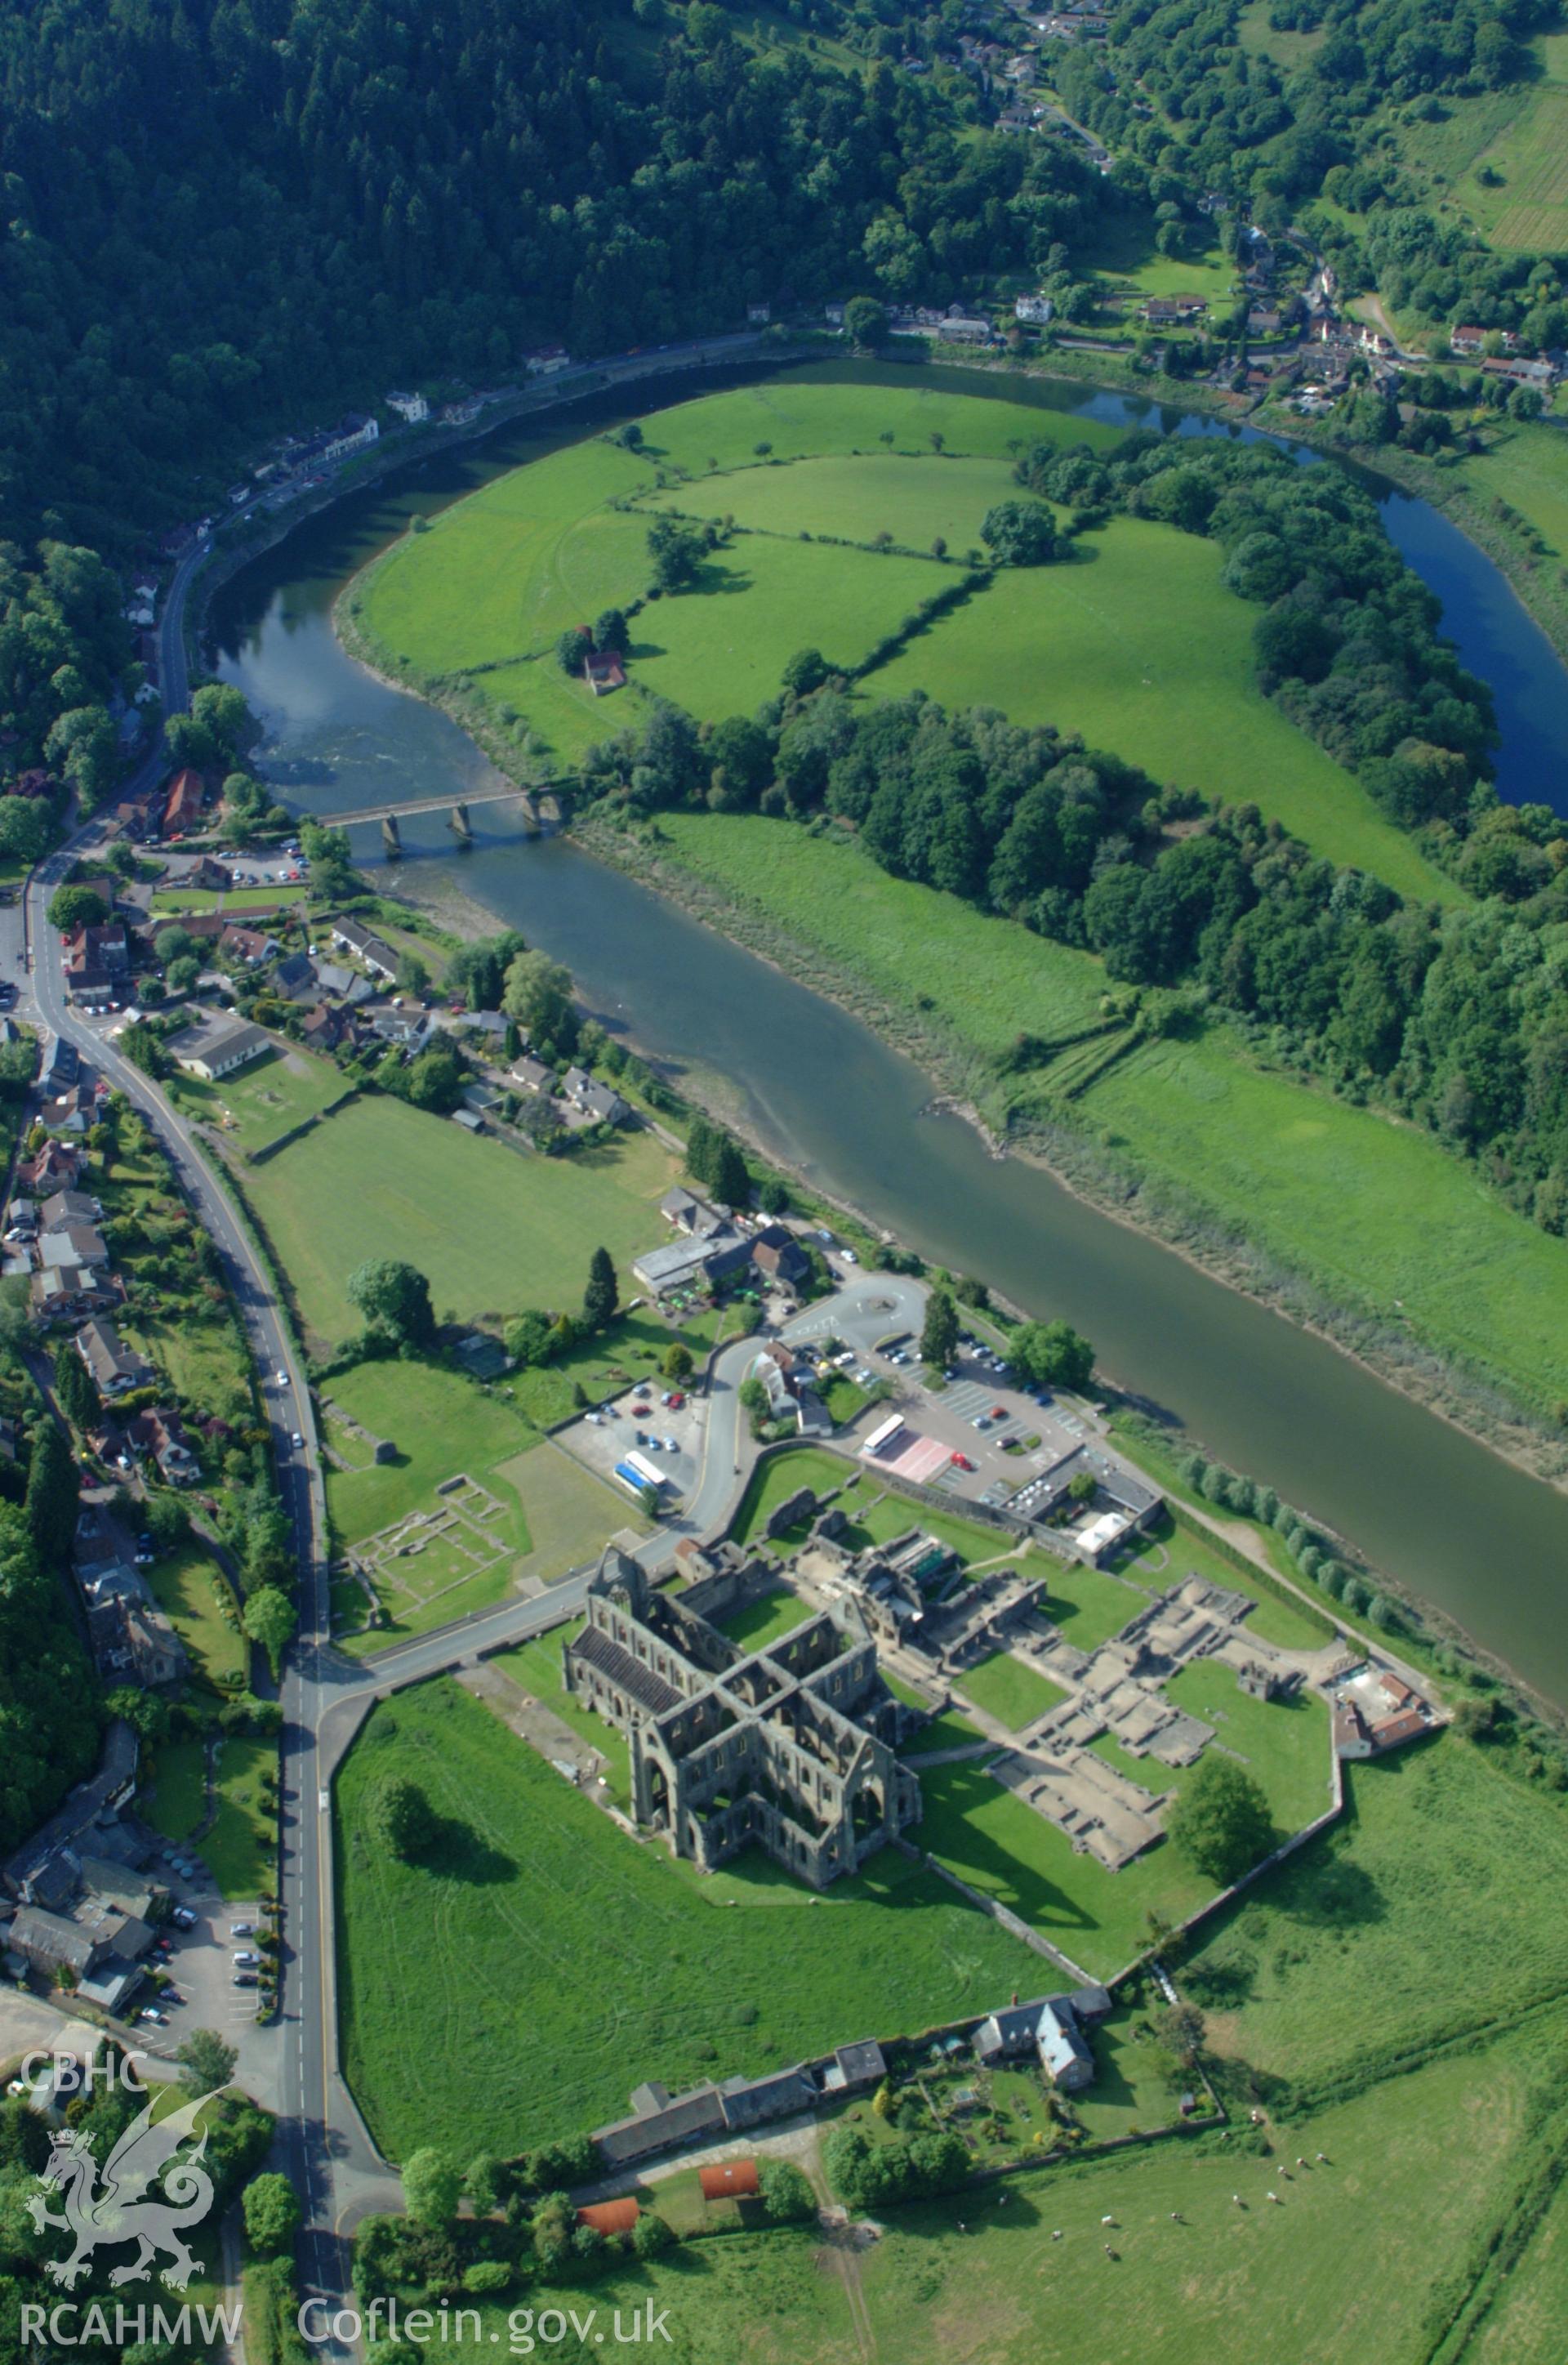 RCAHMW colour oblique aerial photograph of Tintern Abbey taken on 02/06/2004 by Toby Driver